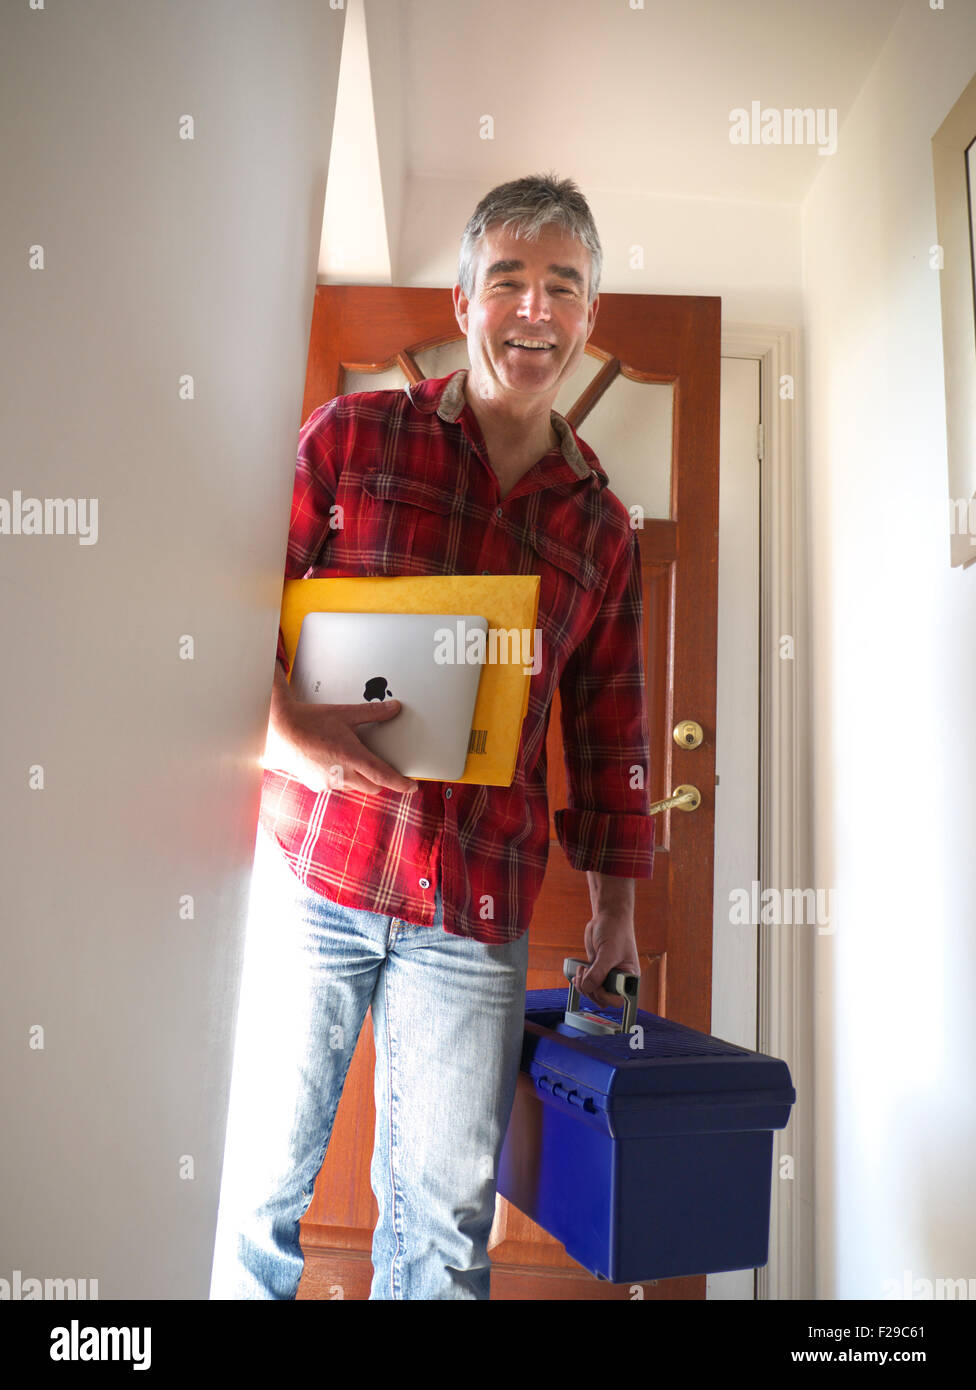 DOMESTIC WORKMAN IPAD TECHNICIAN Happy smiling tradesman with iPad arriving at open door of domestic home for security repair boiler maintenance work Stock Photo